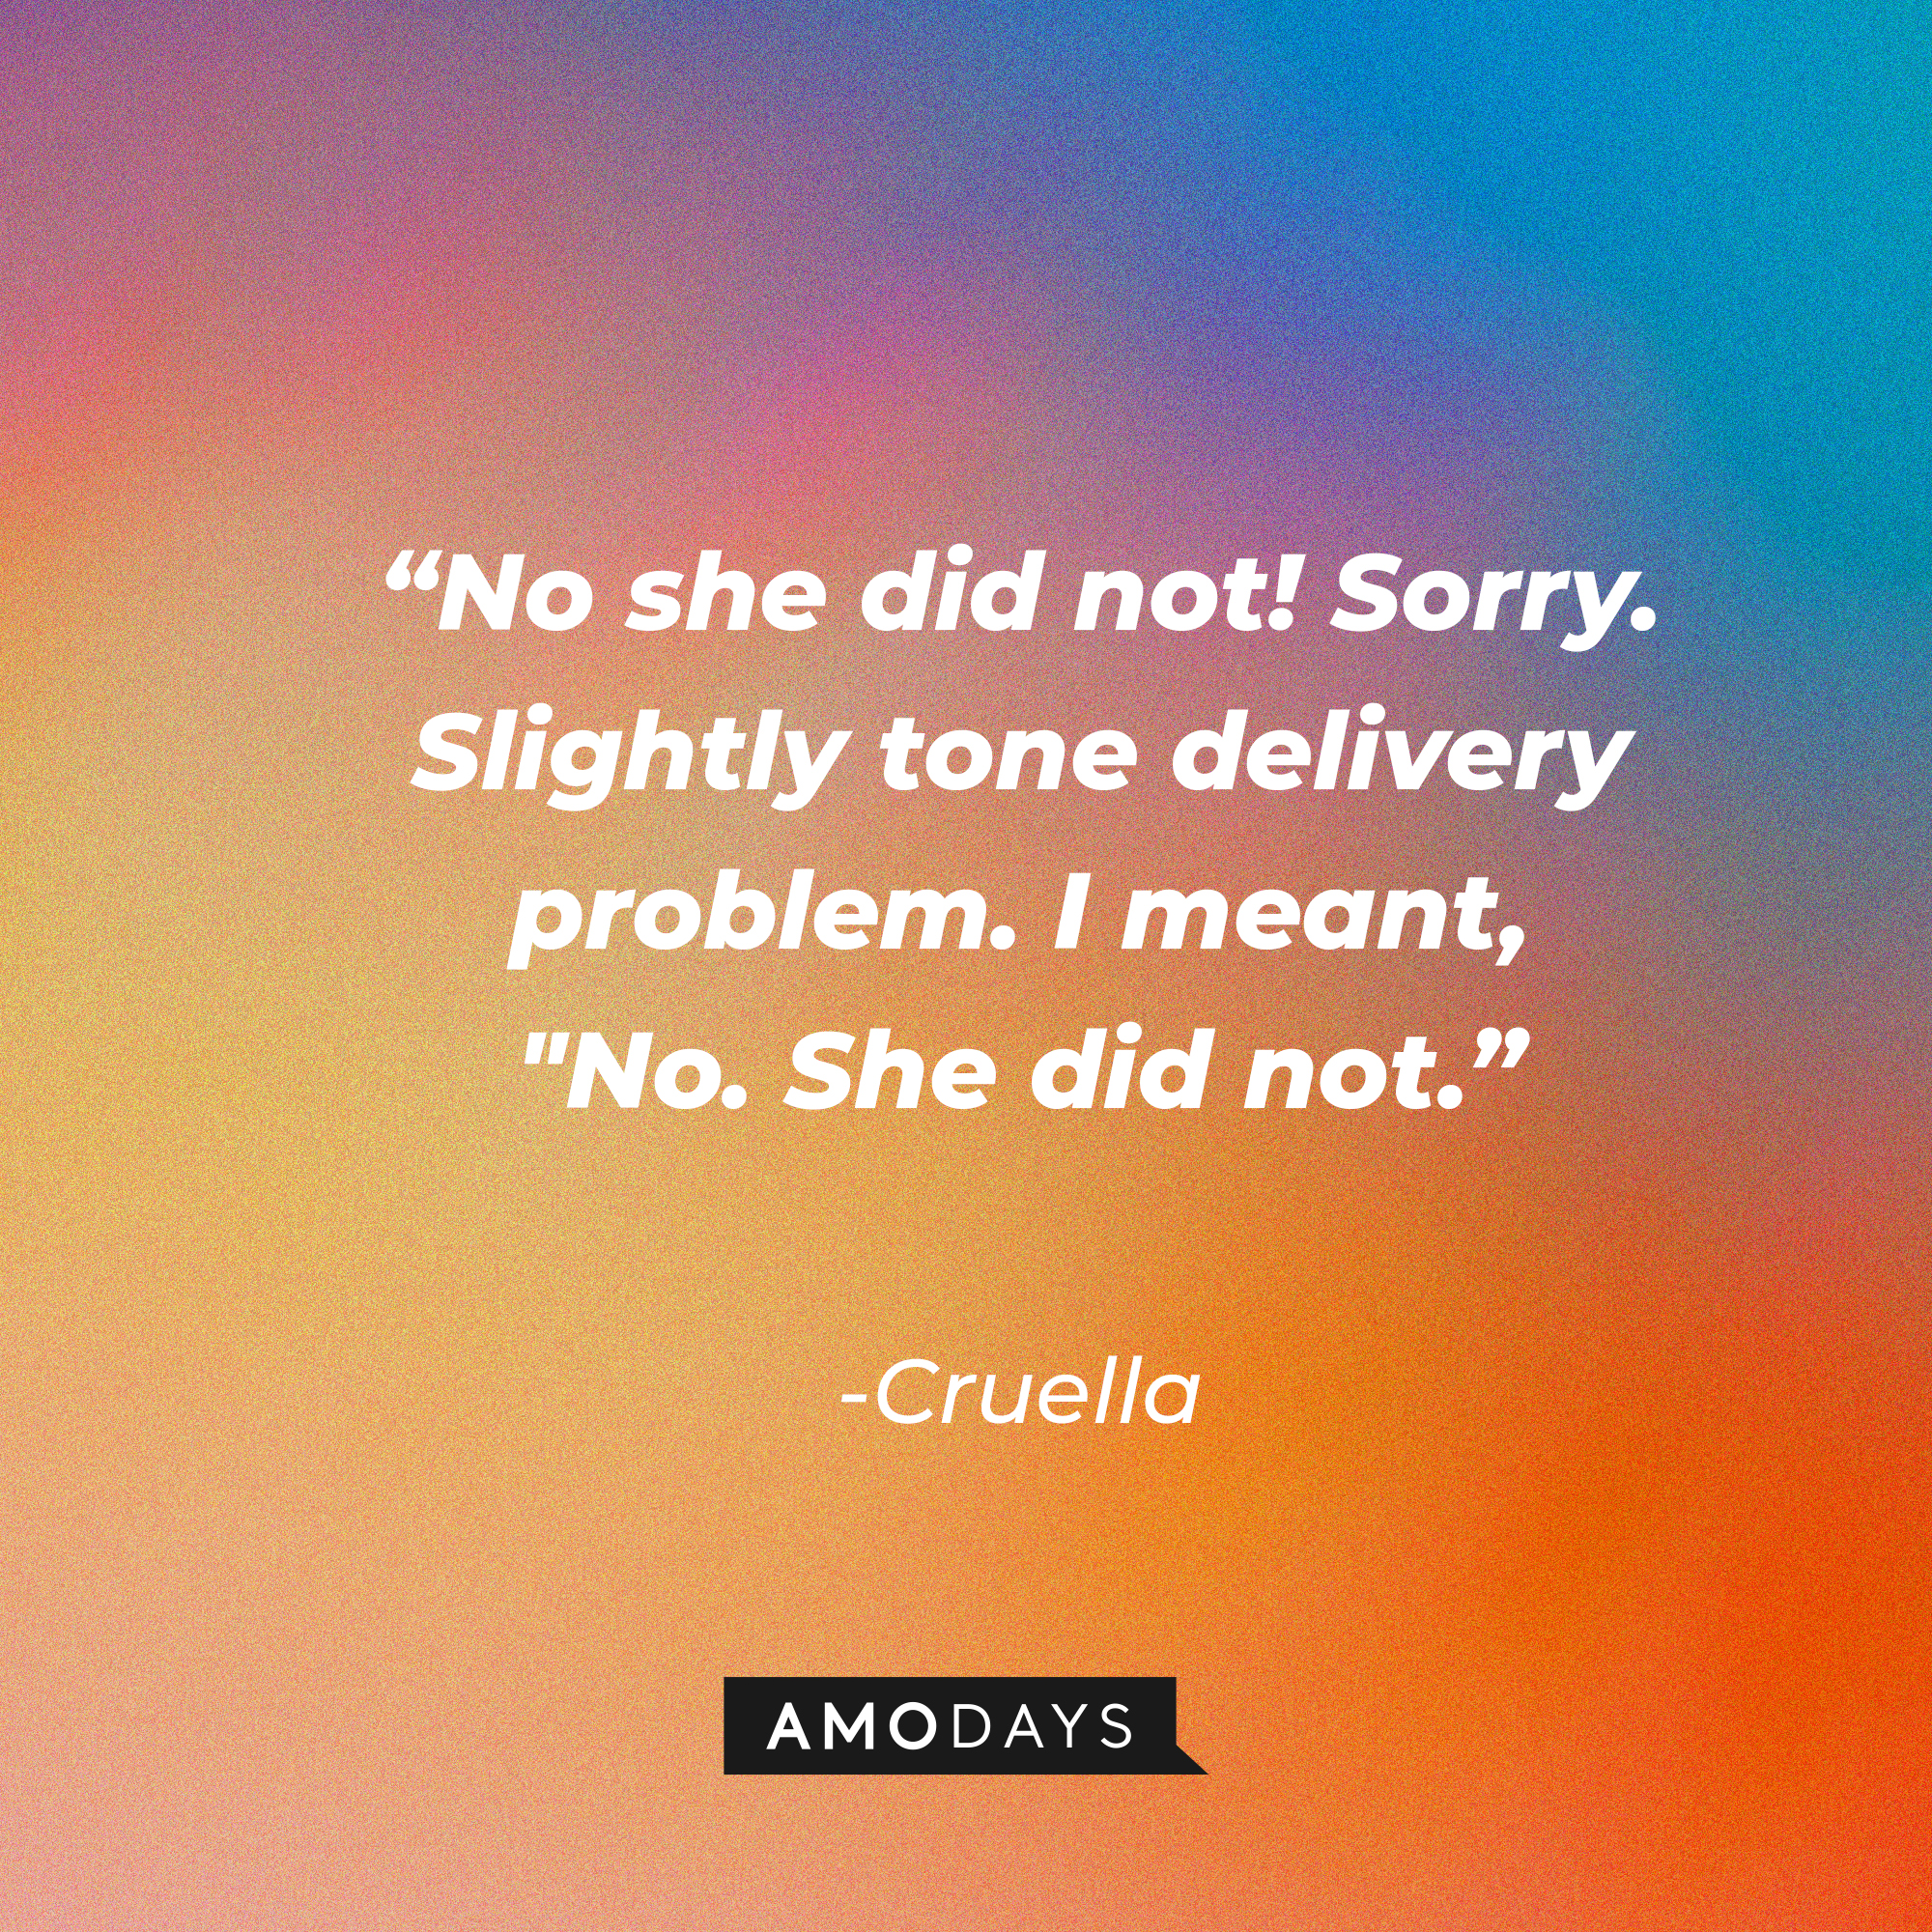 Cruella's quote: "No she did not! Sorry. Slightly tone delivery problem. I meant, "No. She did not." | Source: Amodays